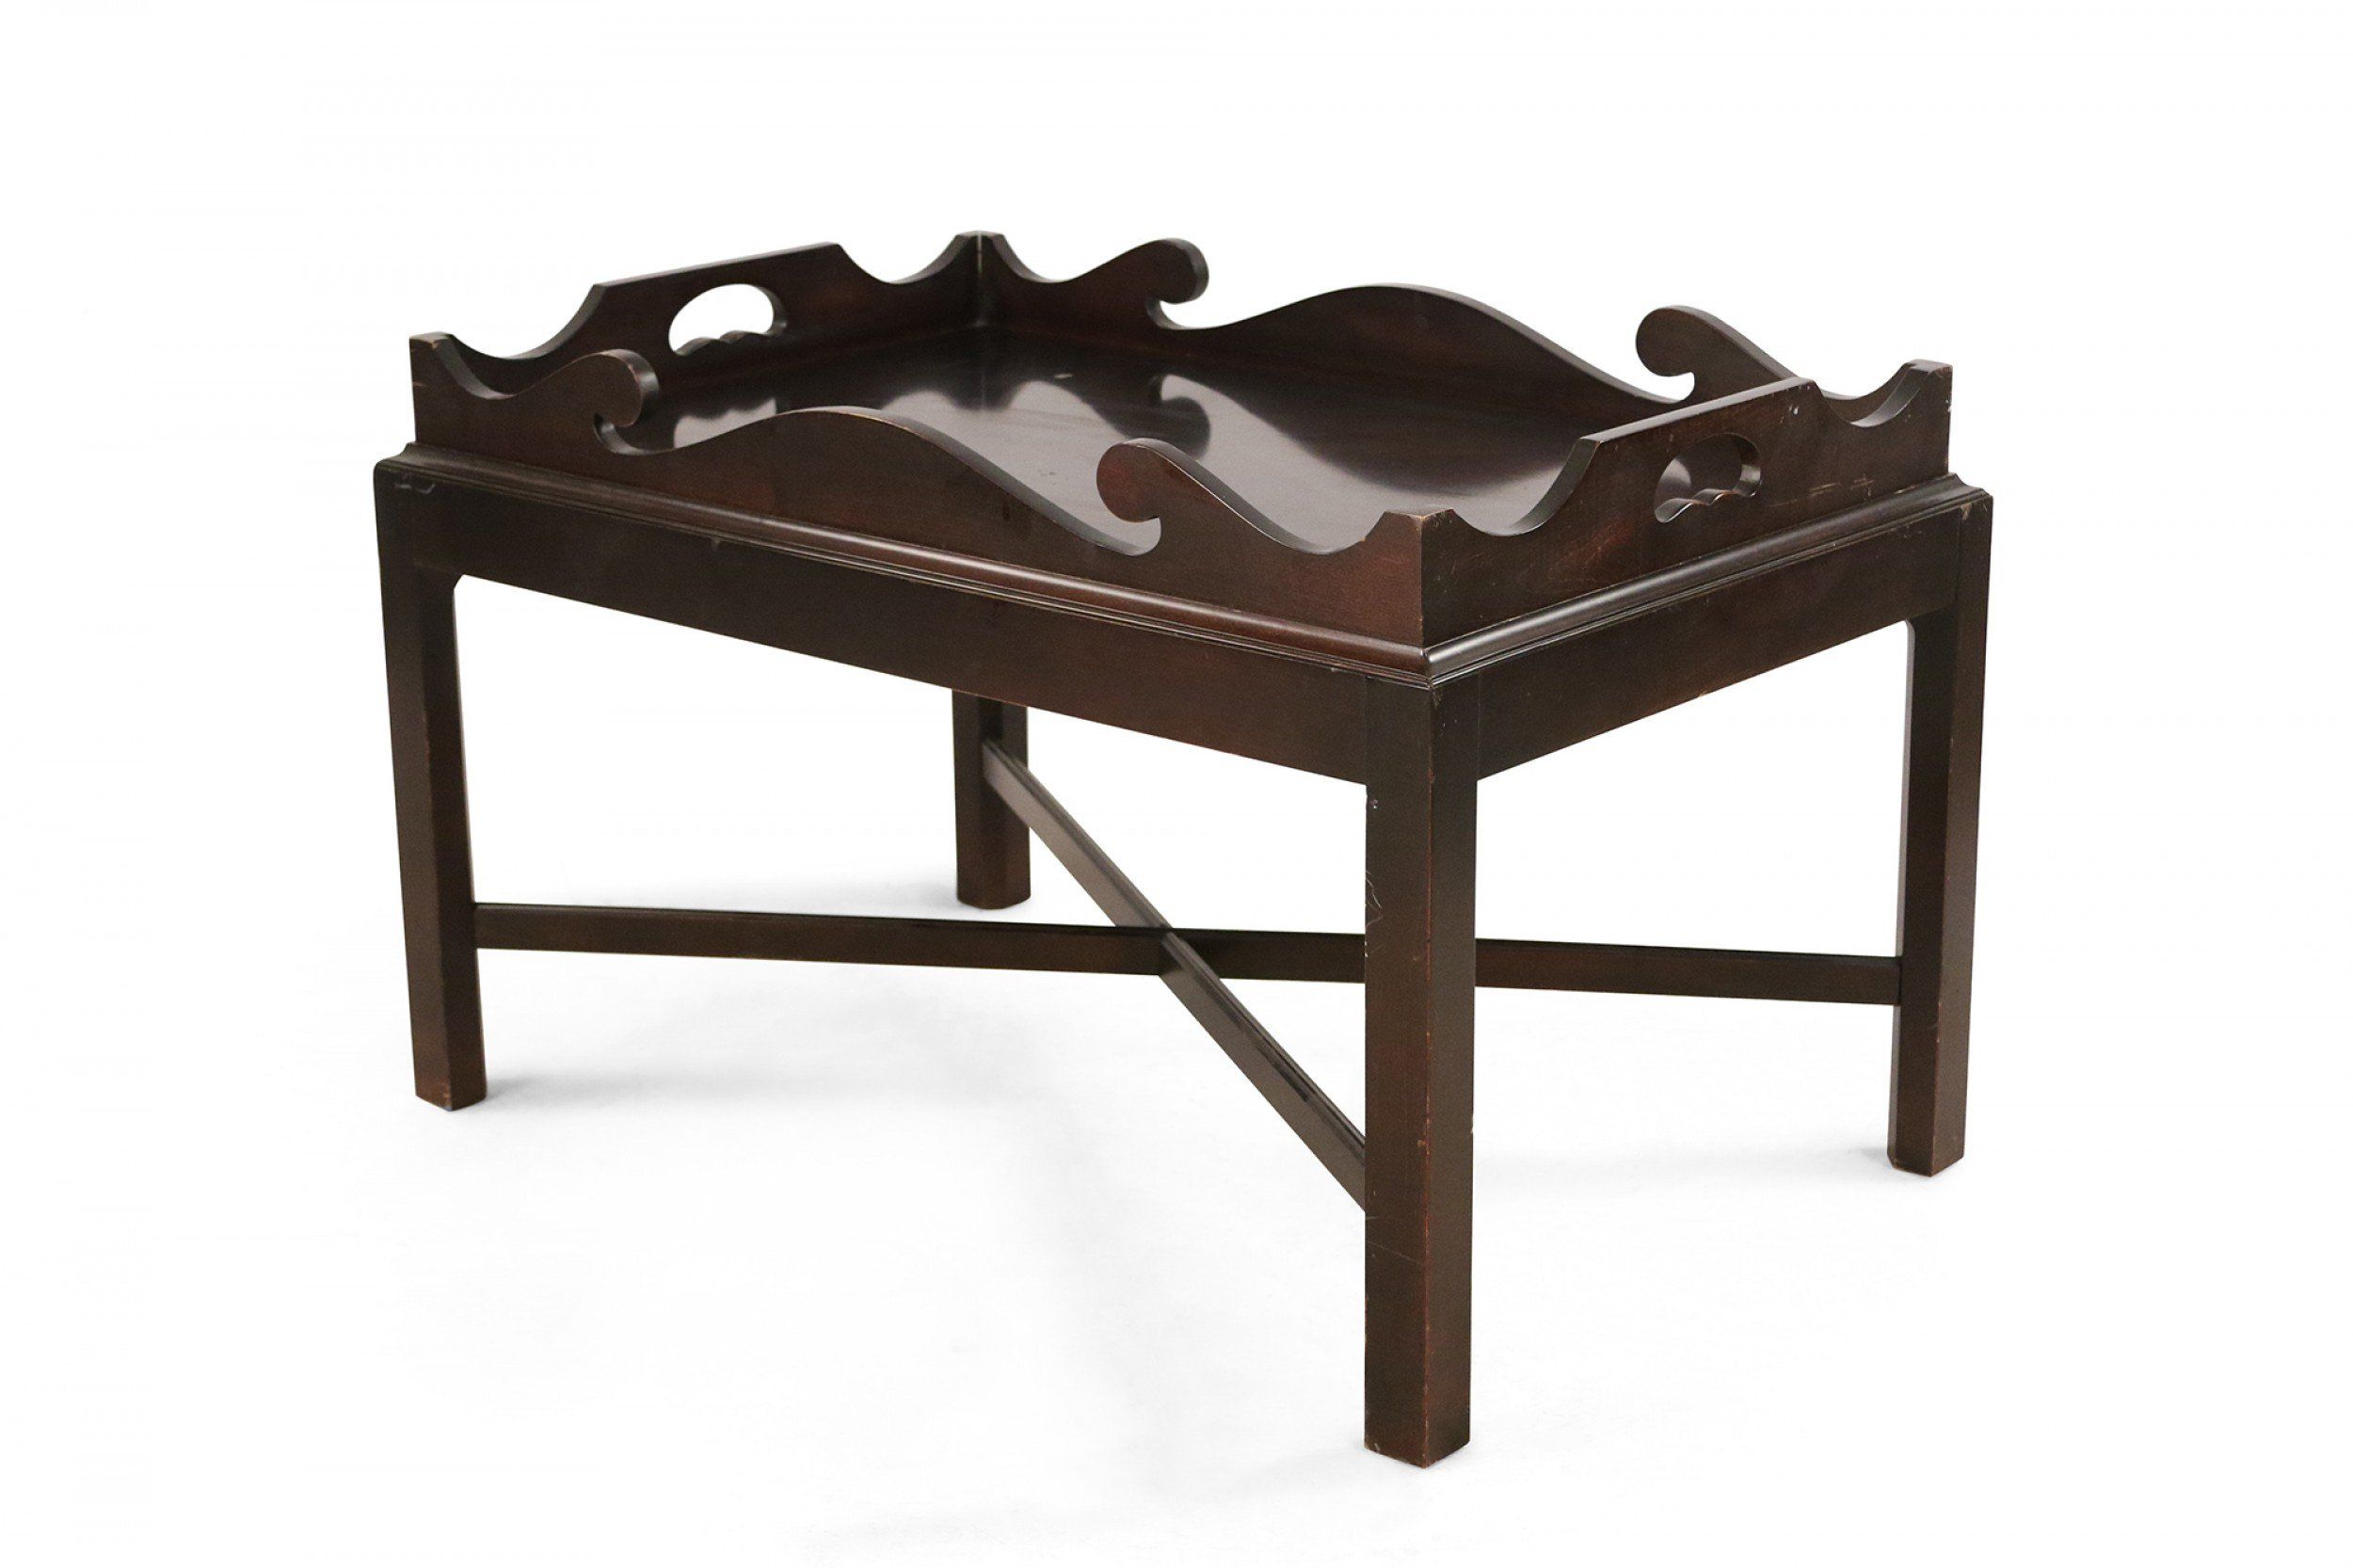 Contemporary Dark Wood Removable Tray Top Coffee Table Inside Detachable Tray Coffee Tables (View 10 of 15)